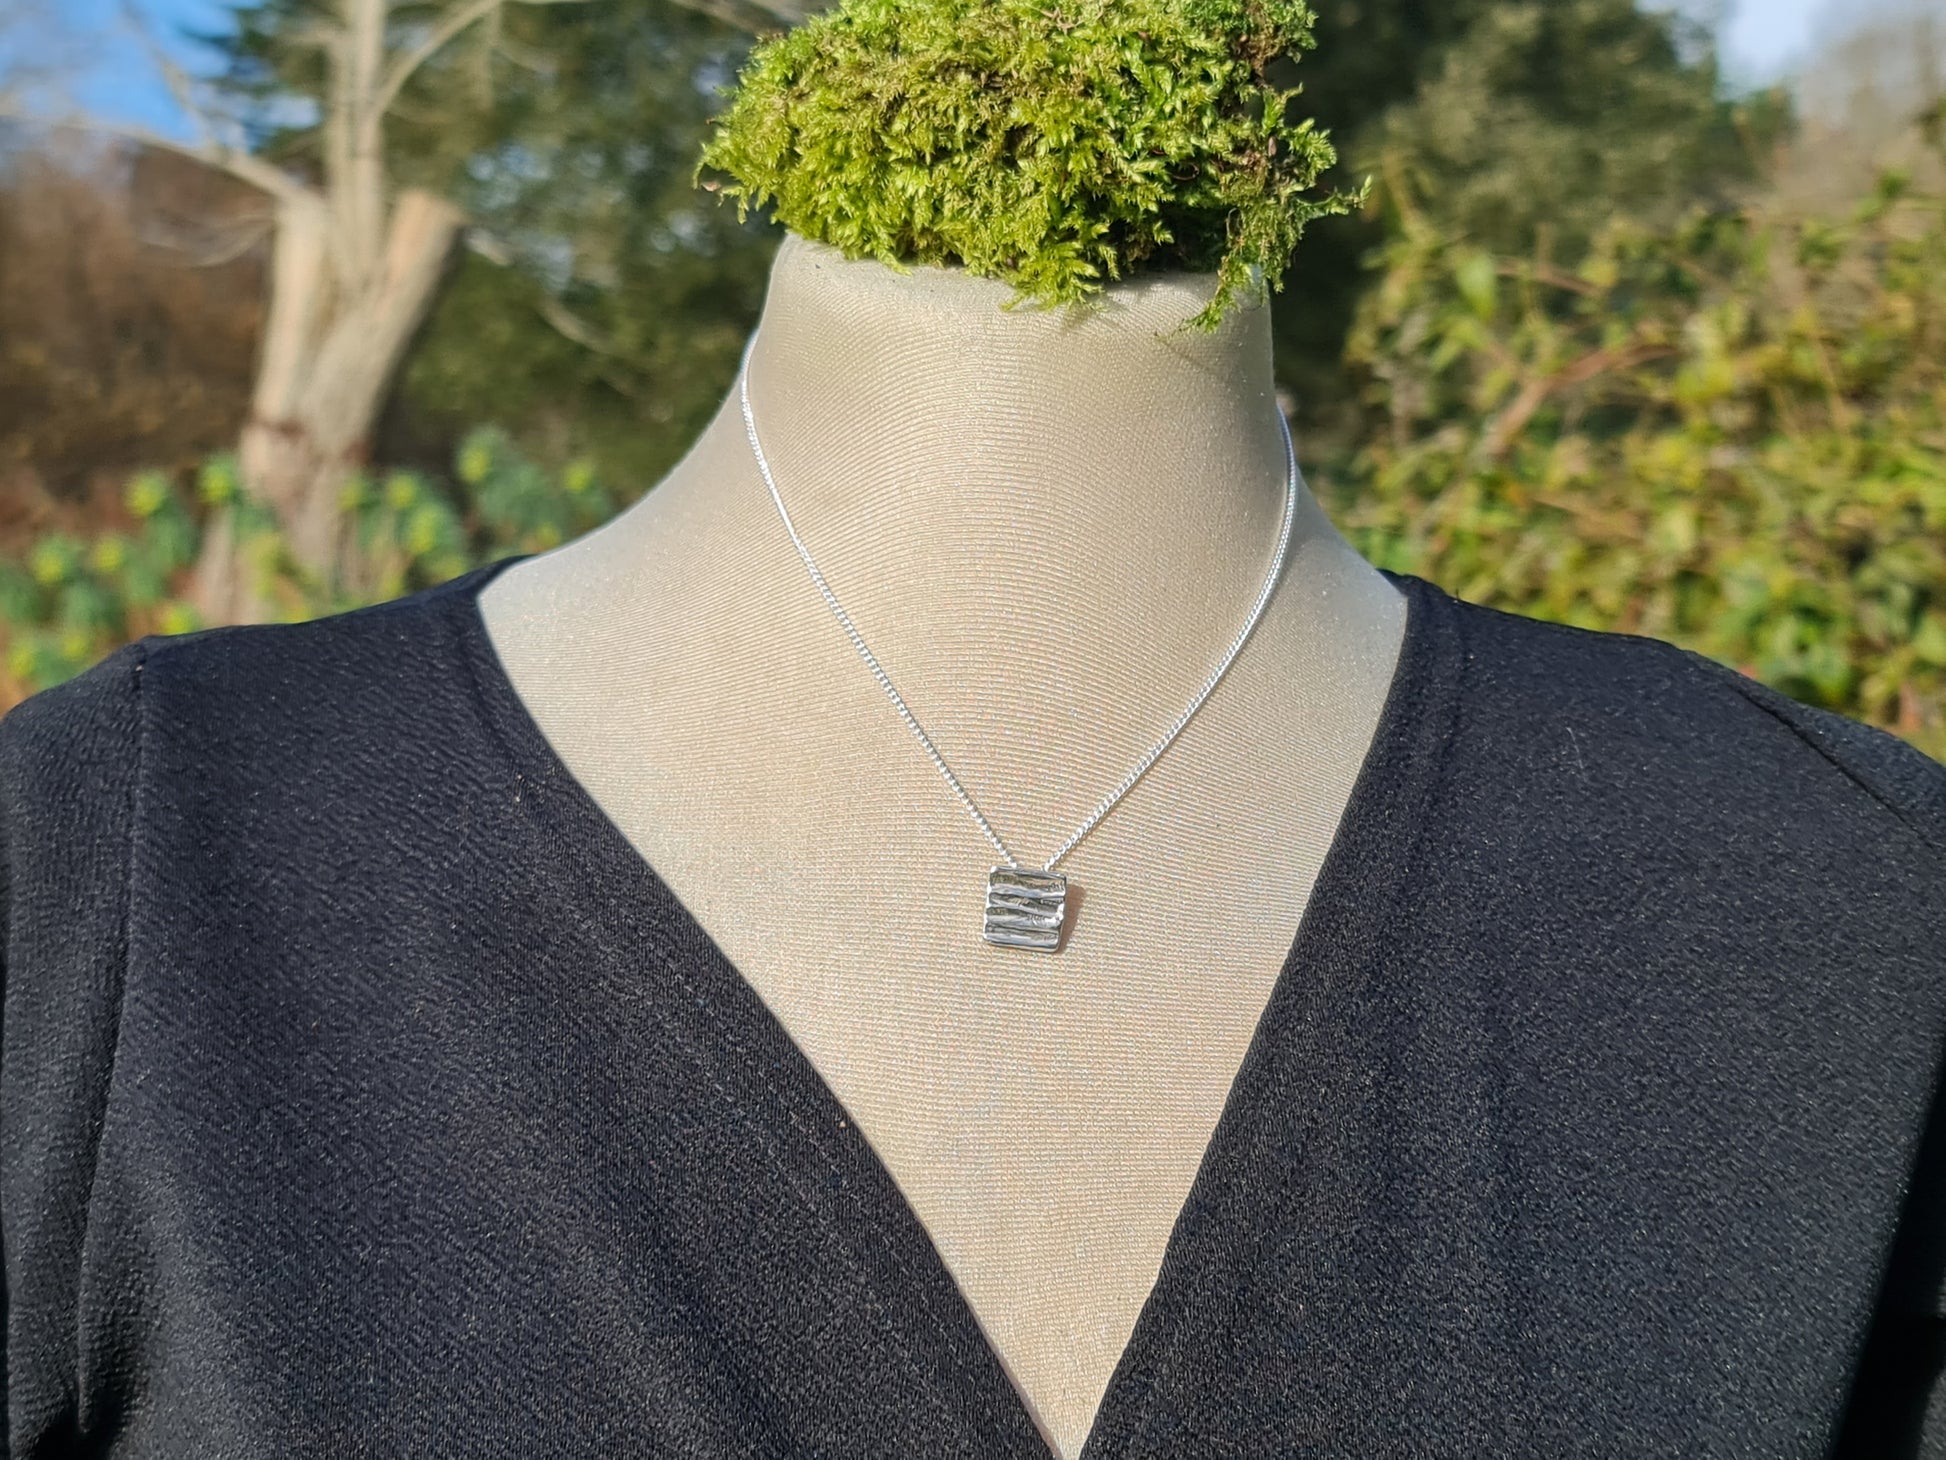 Sterling silver hand crafted pendant with a tree bark texture on a silver chain.